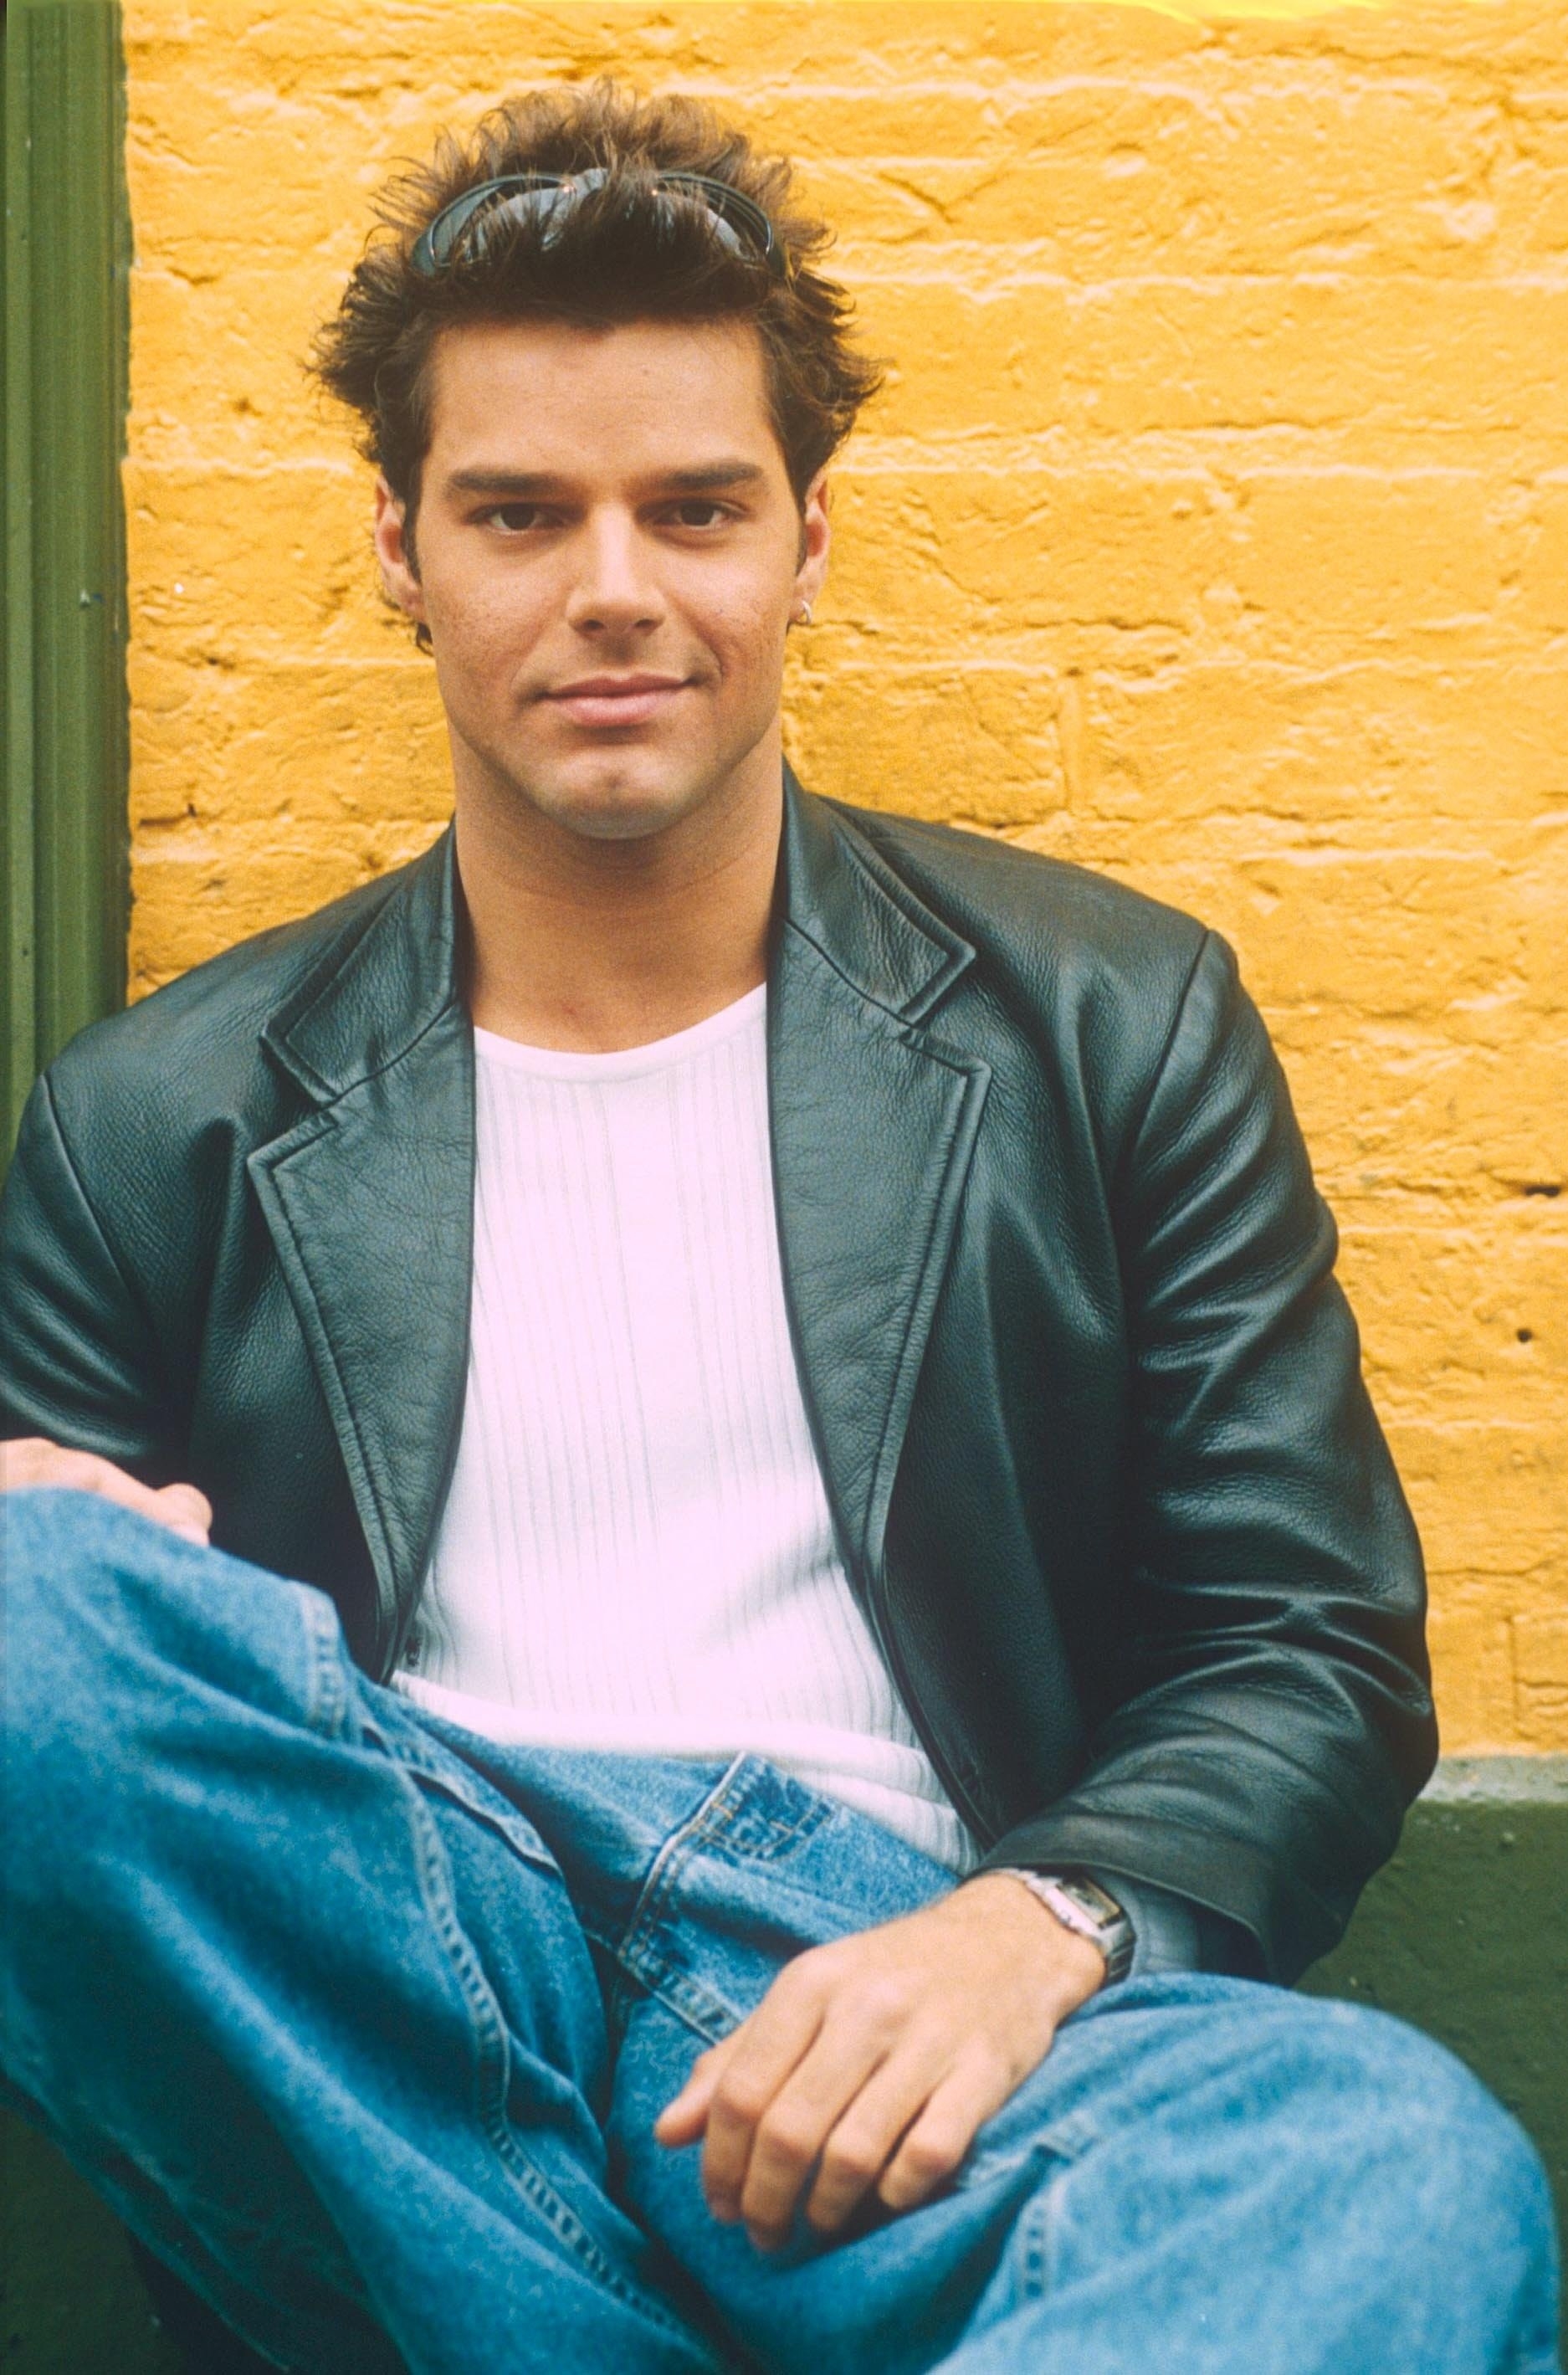 Martin posing for a portrait in 1997